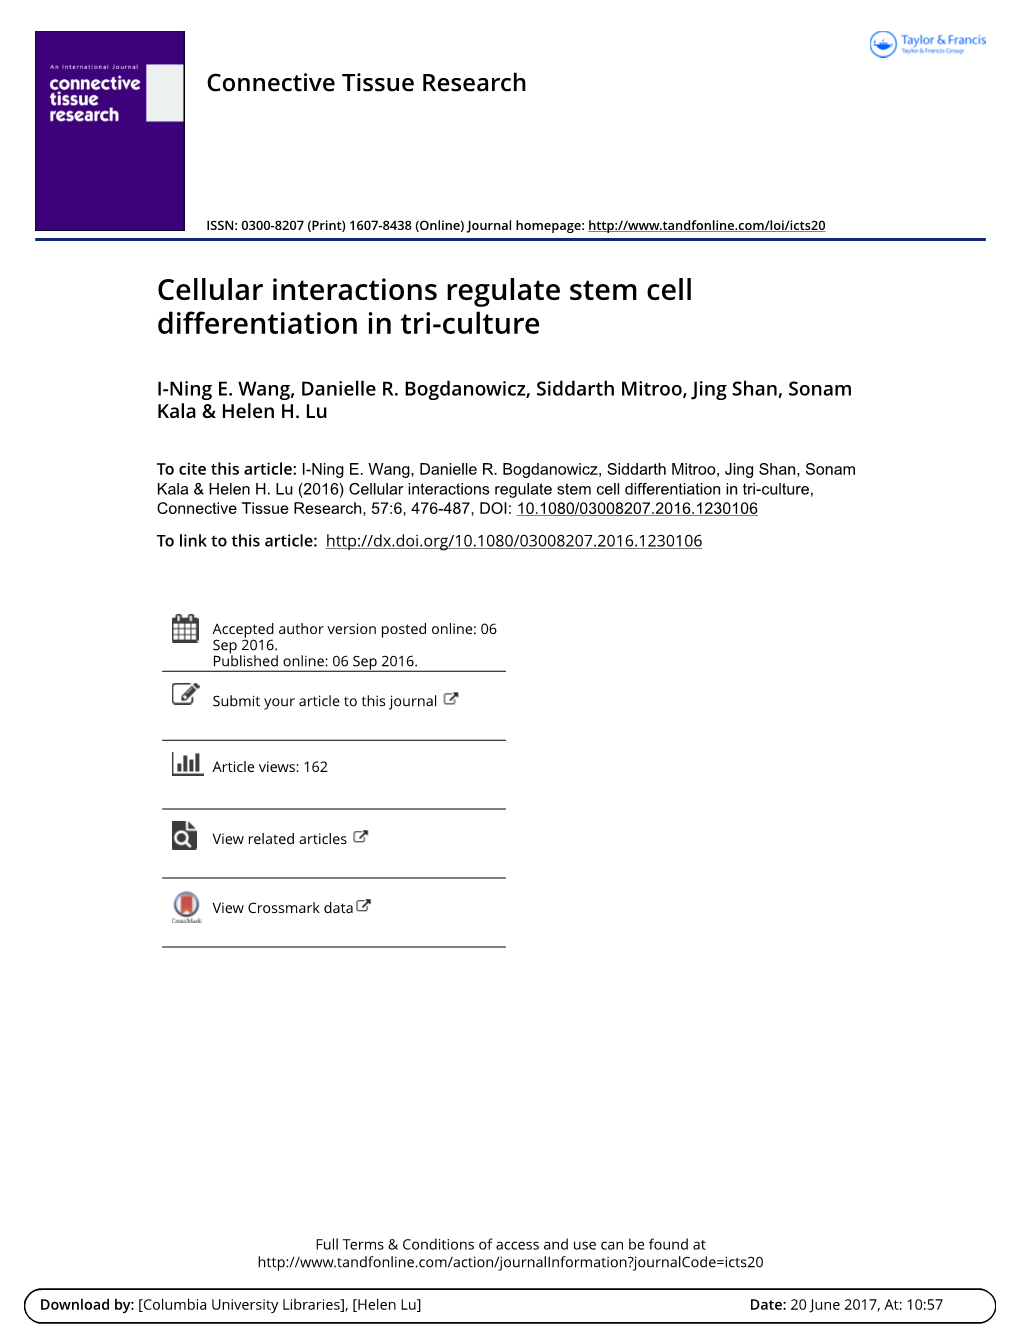 Cellular Interactions Regulate Stem Cell Differentiation in Tri-Culture